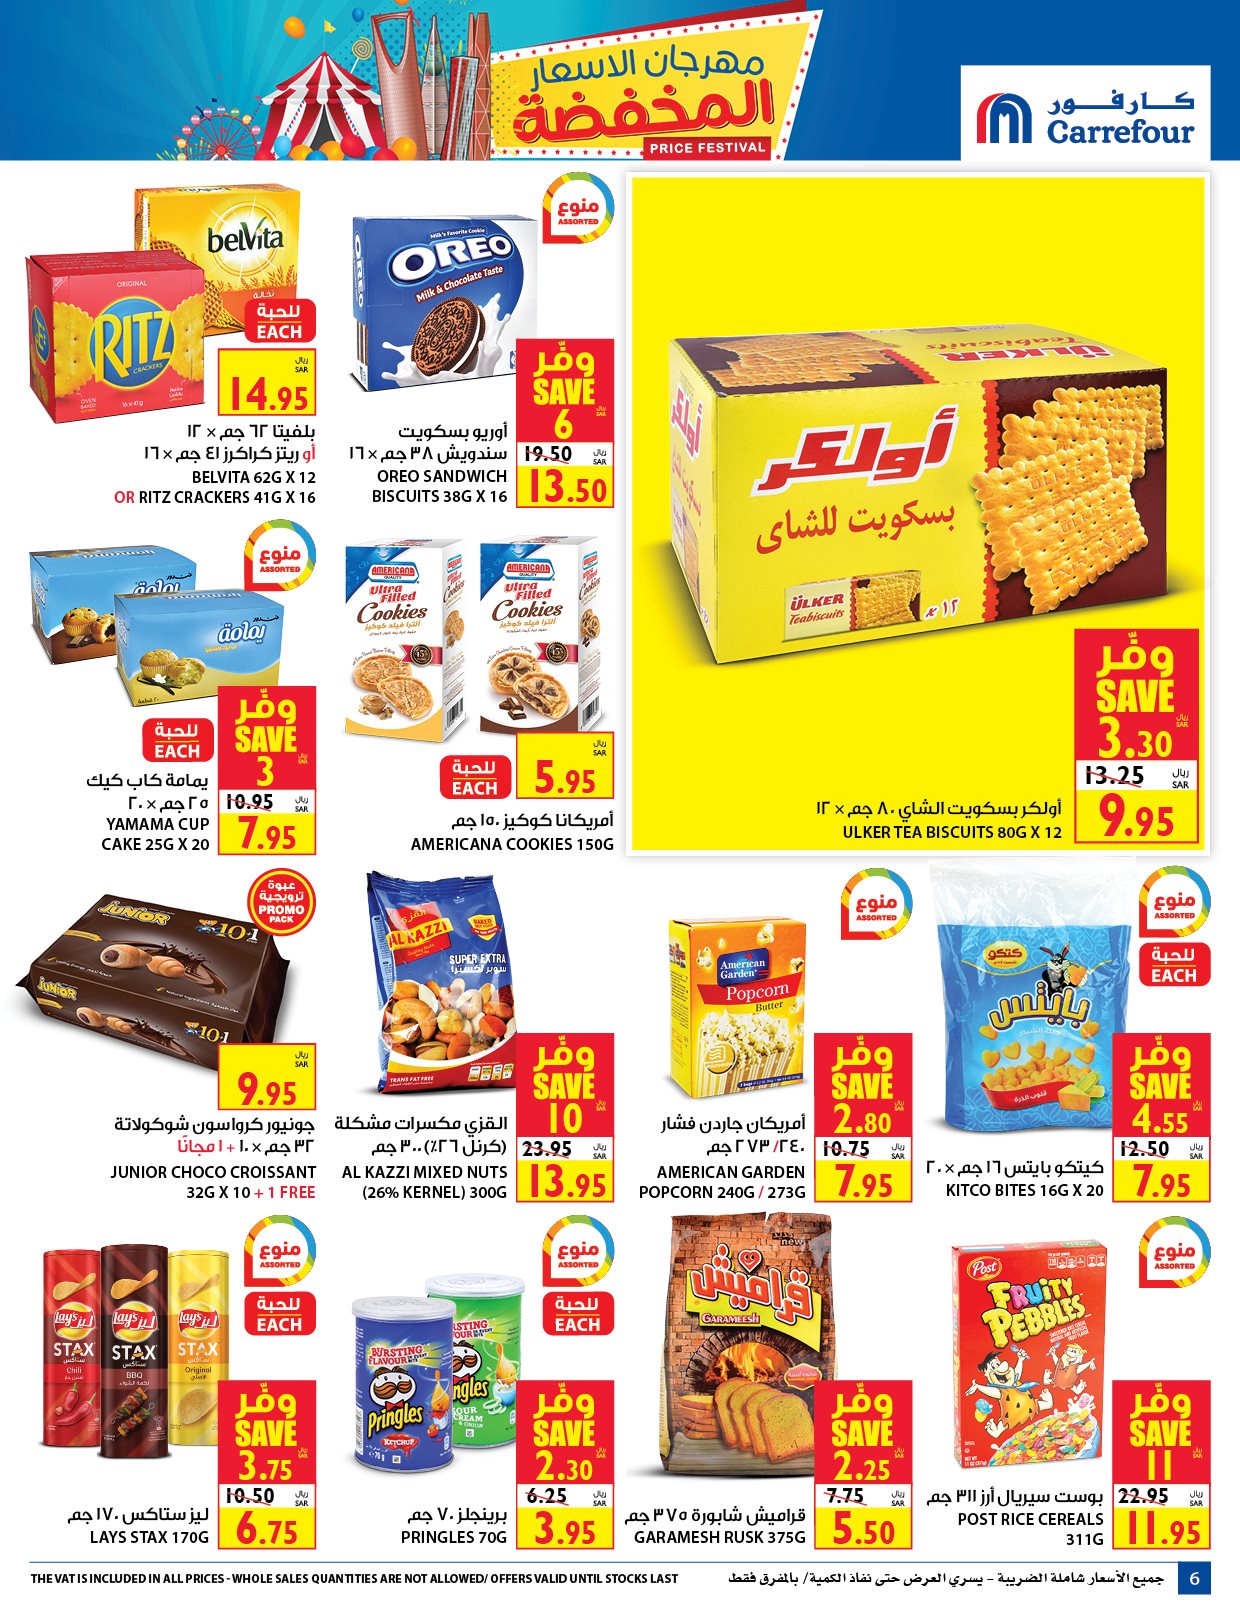 Carrefour Festival Offers from 12/8 till 25/8 | Carrefour KSA 7